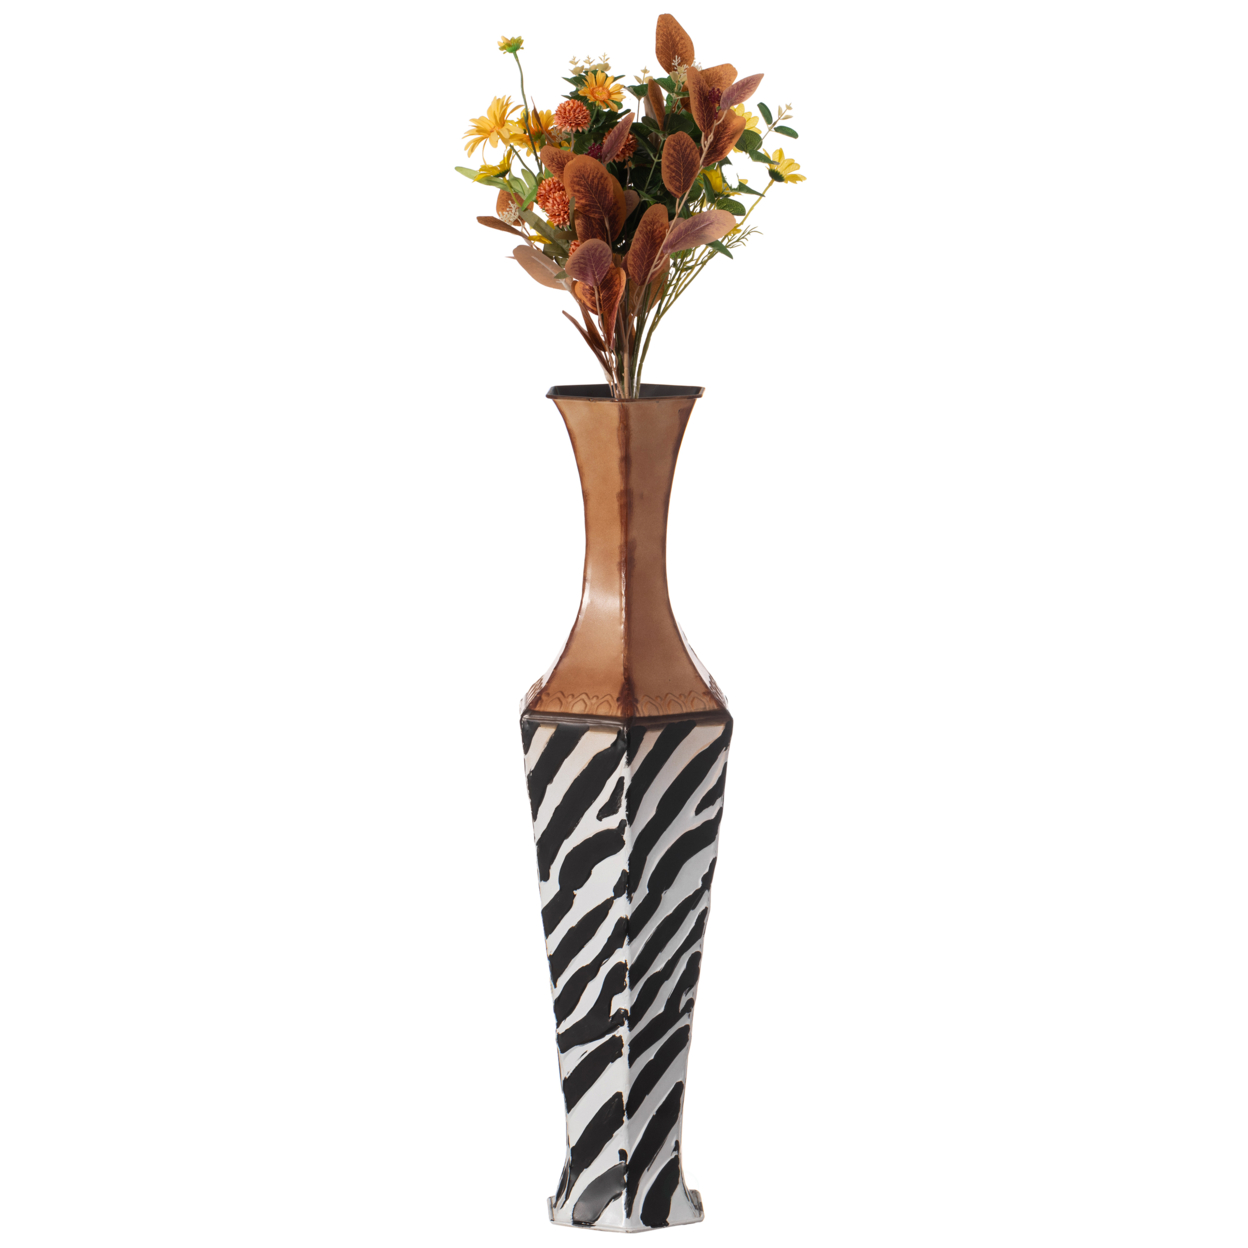 26 White Striped And Brown Metal Floor Vase Centerpiece Home Decor For Dried Flower And Artificial Floral Arrangements, Living Room Decor